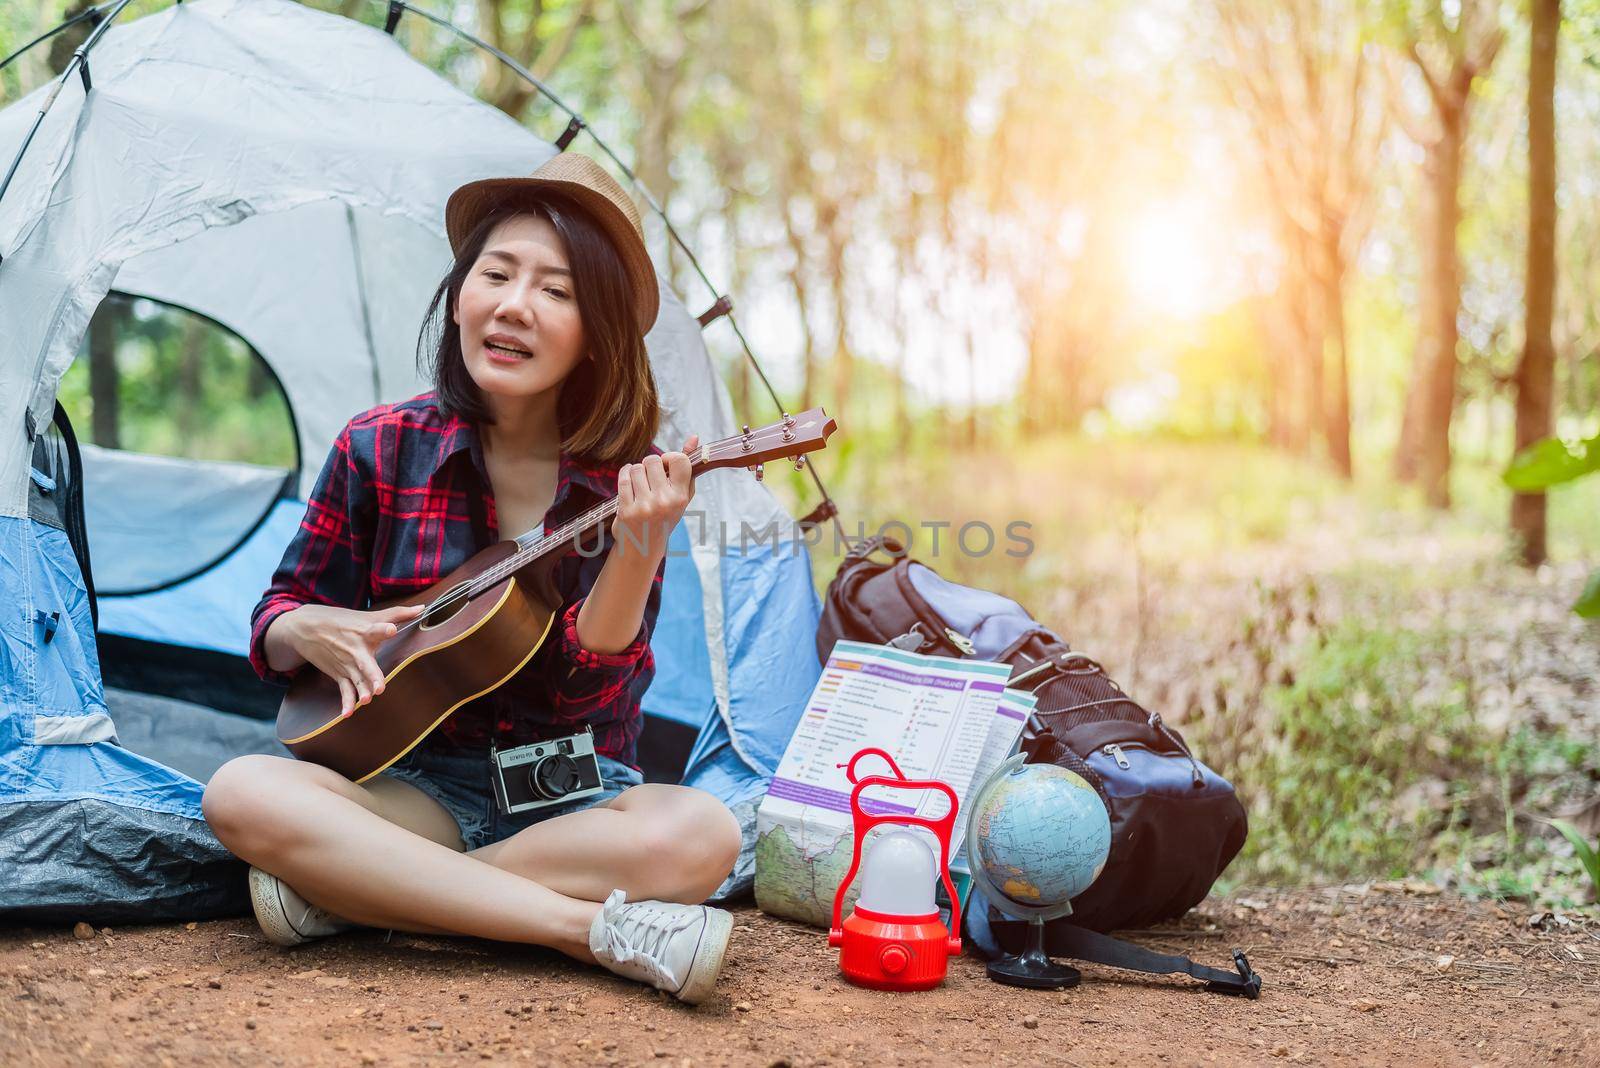 Beautiful Asian woman playing Ukulele in front of camping tent in pine woods. People and Lifestyles concept. Adventure and Travel theme.